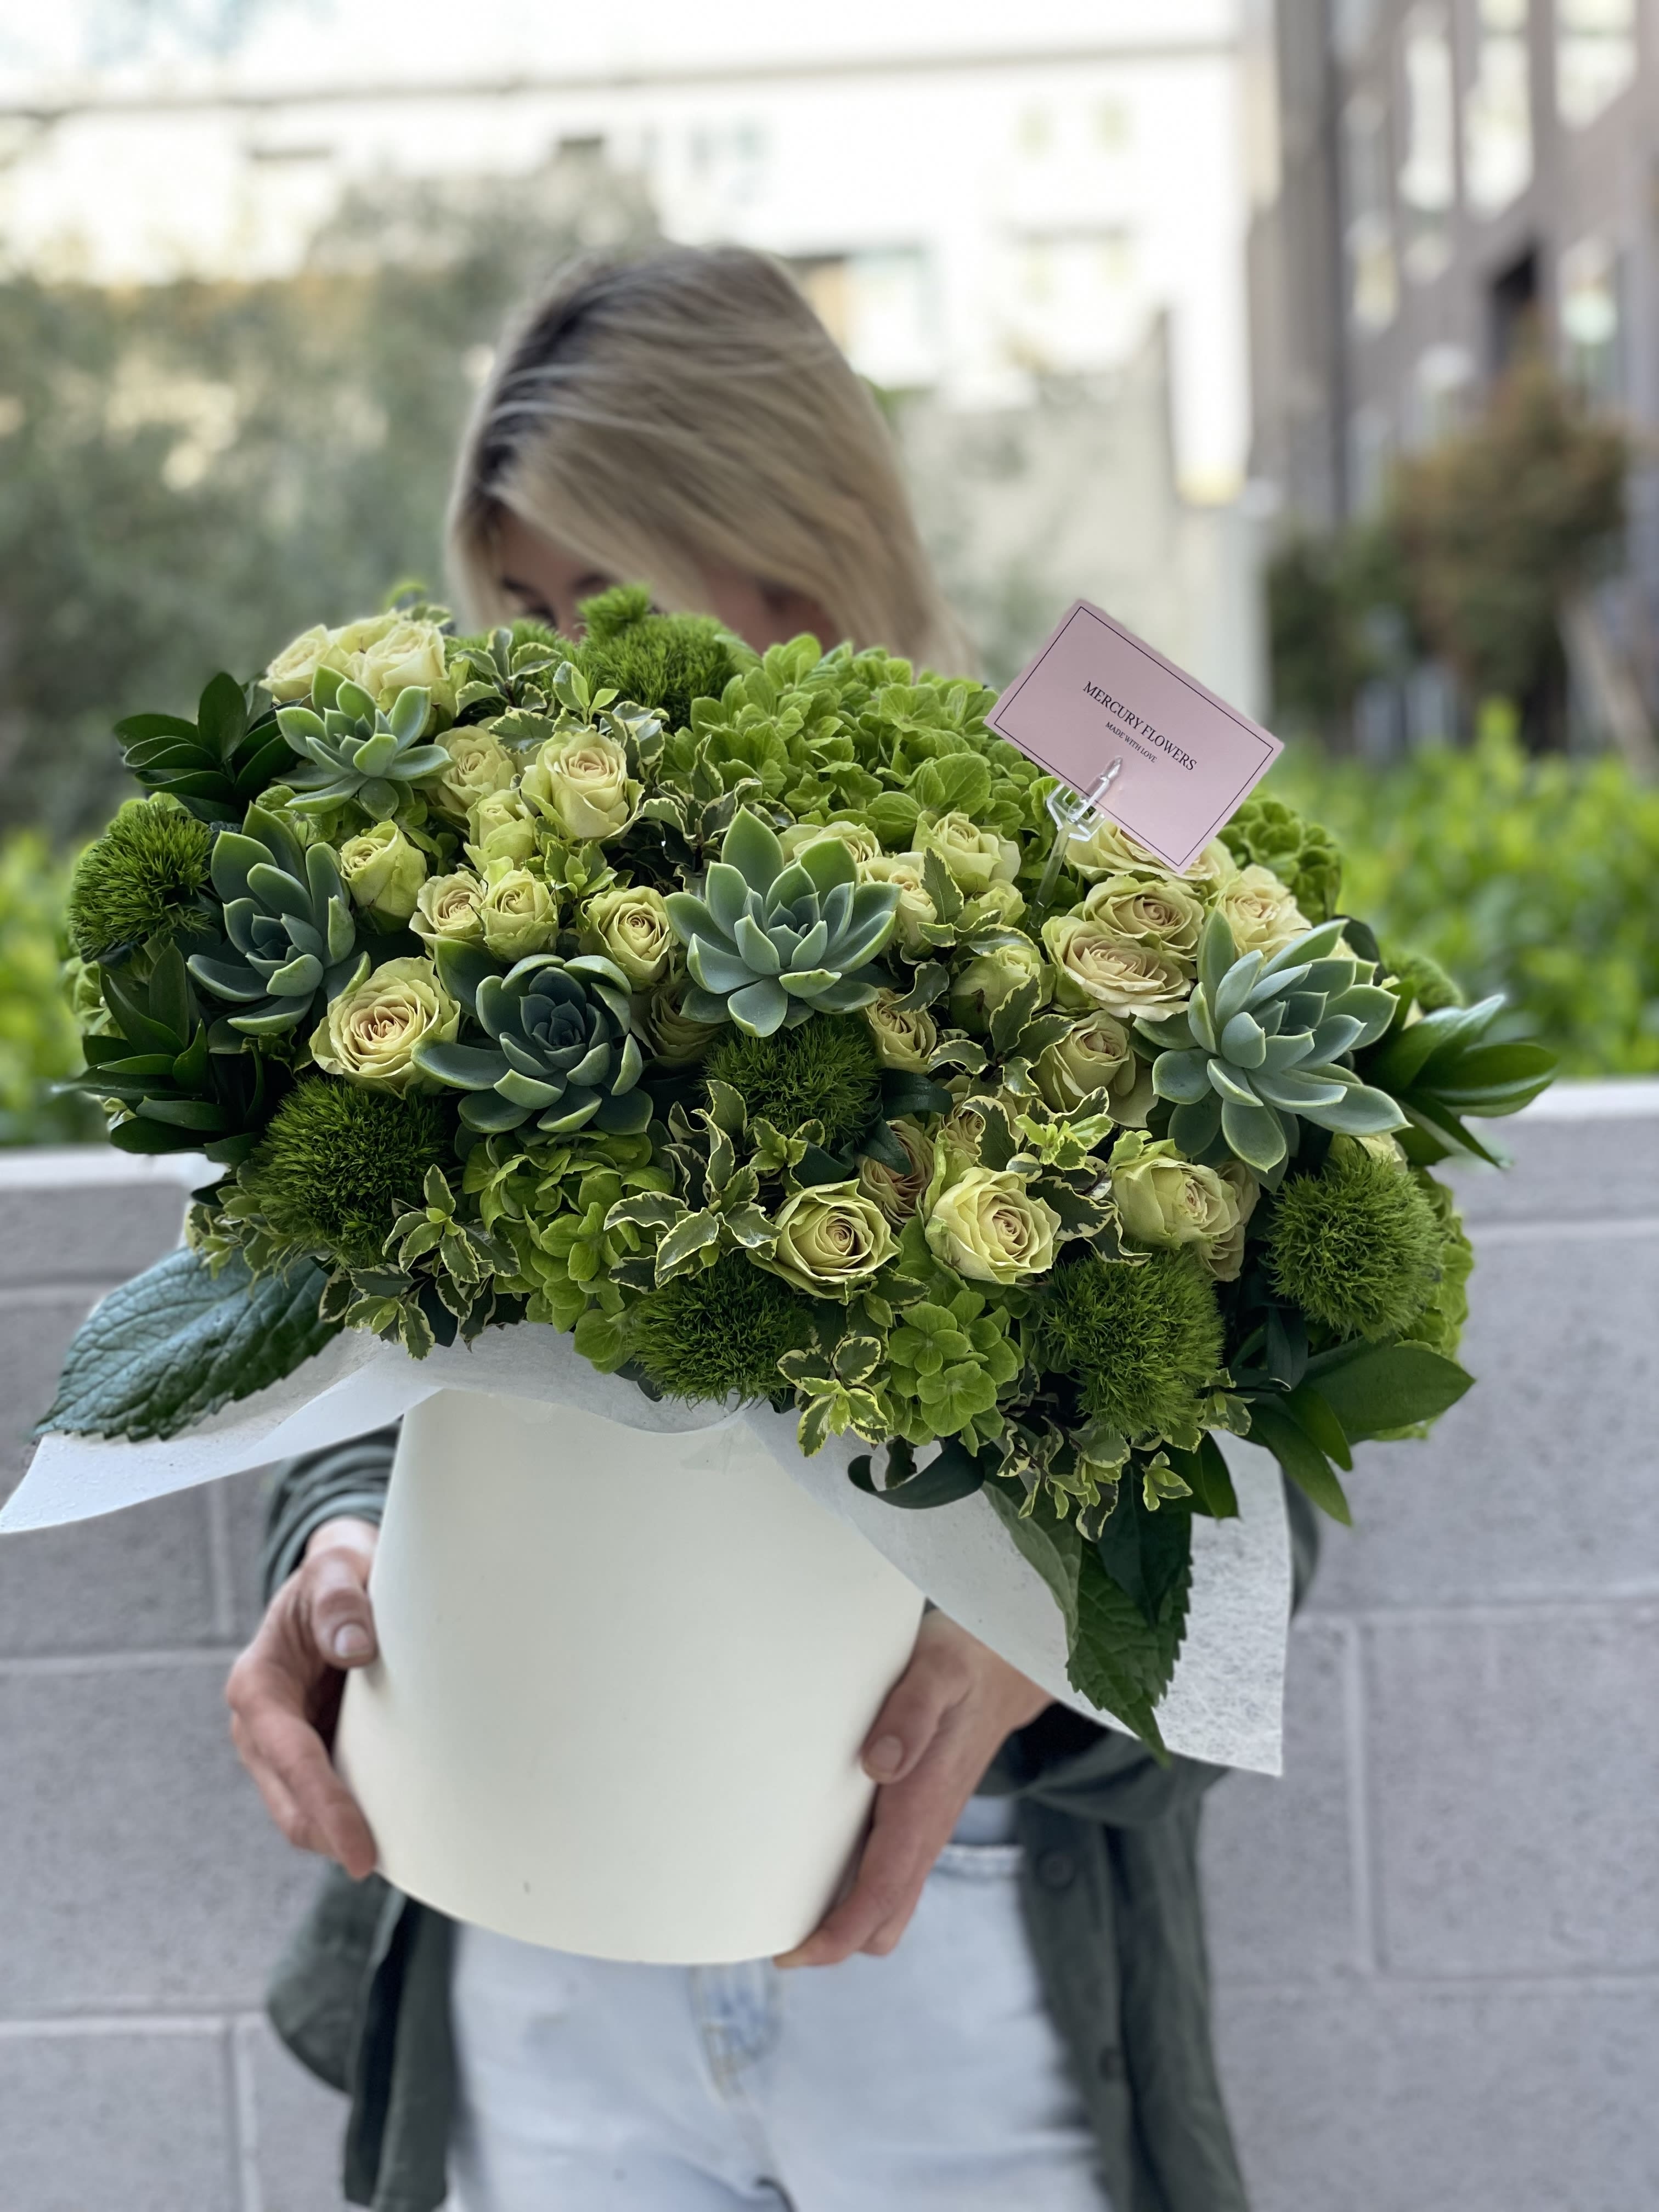 Green box - Spring box with green garden roses ,succulents and greenery